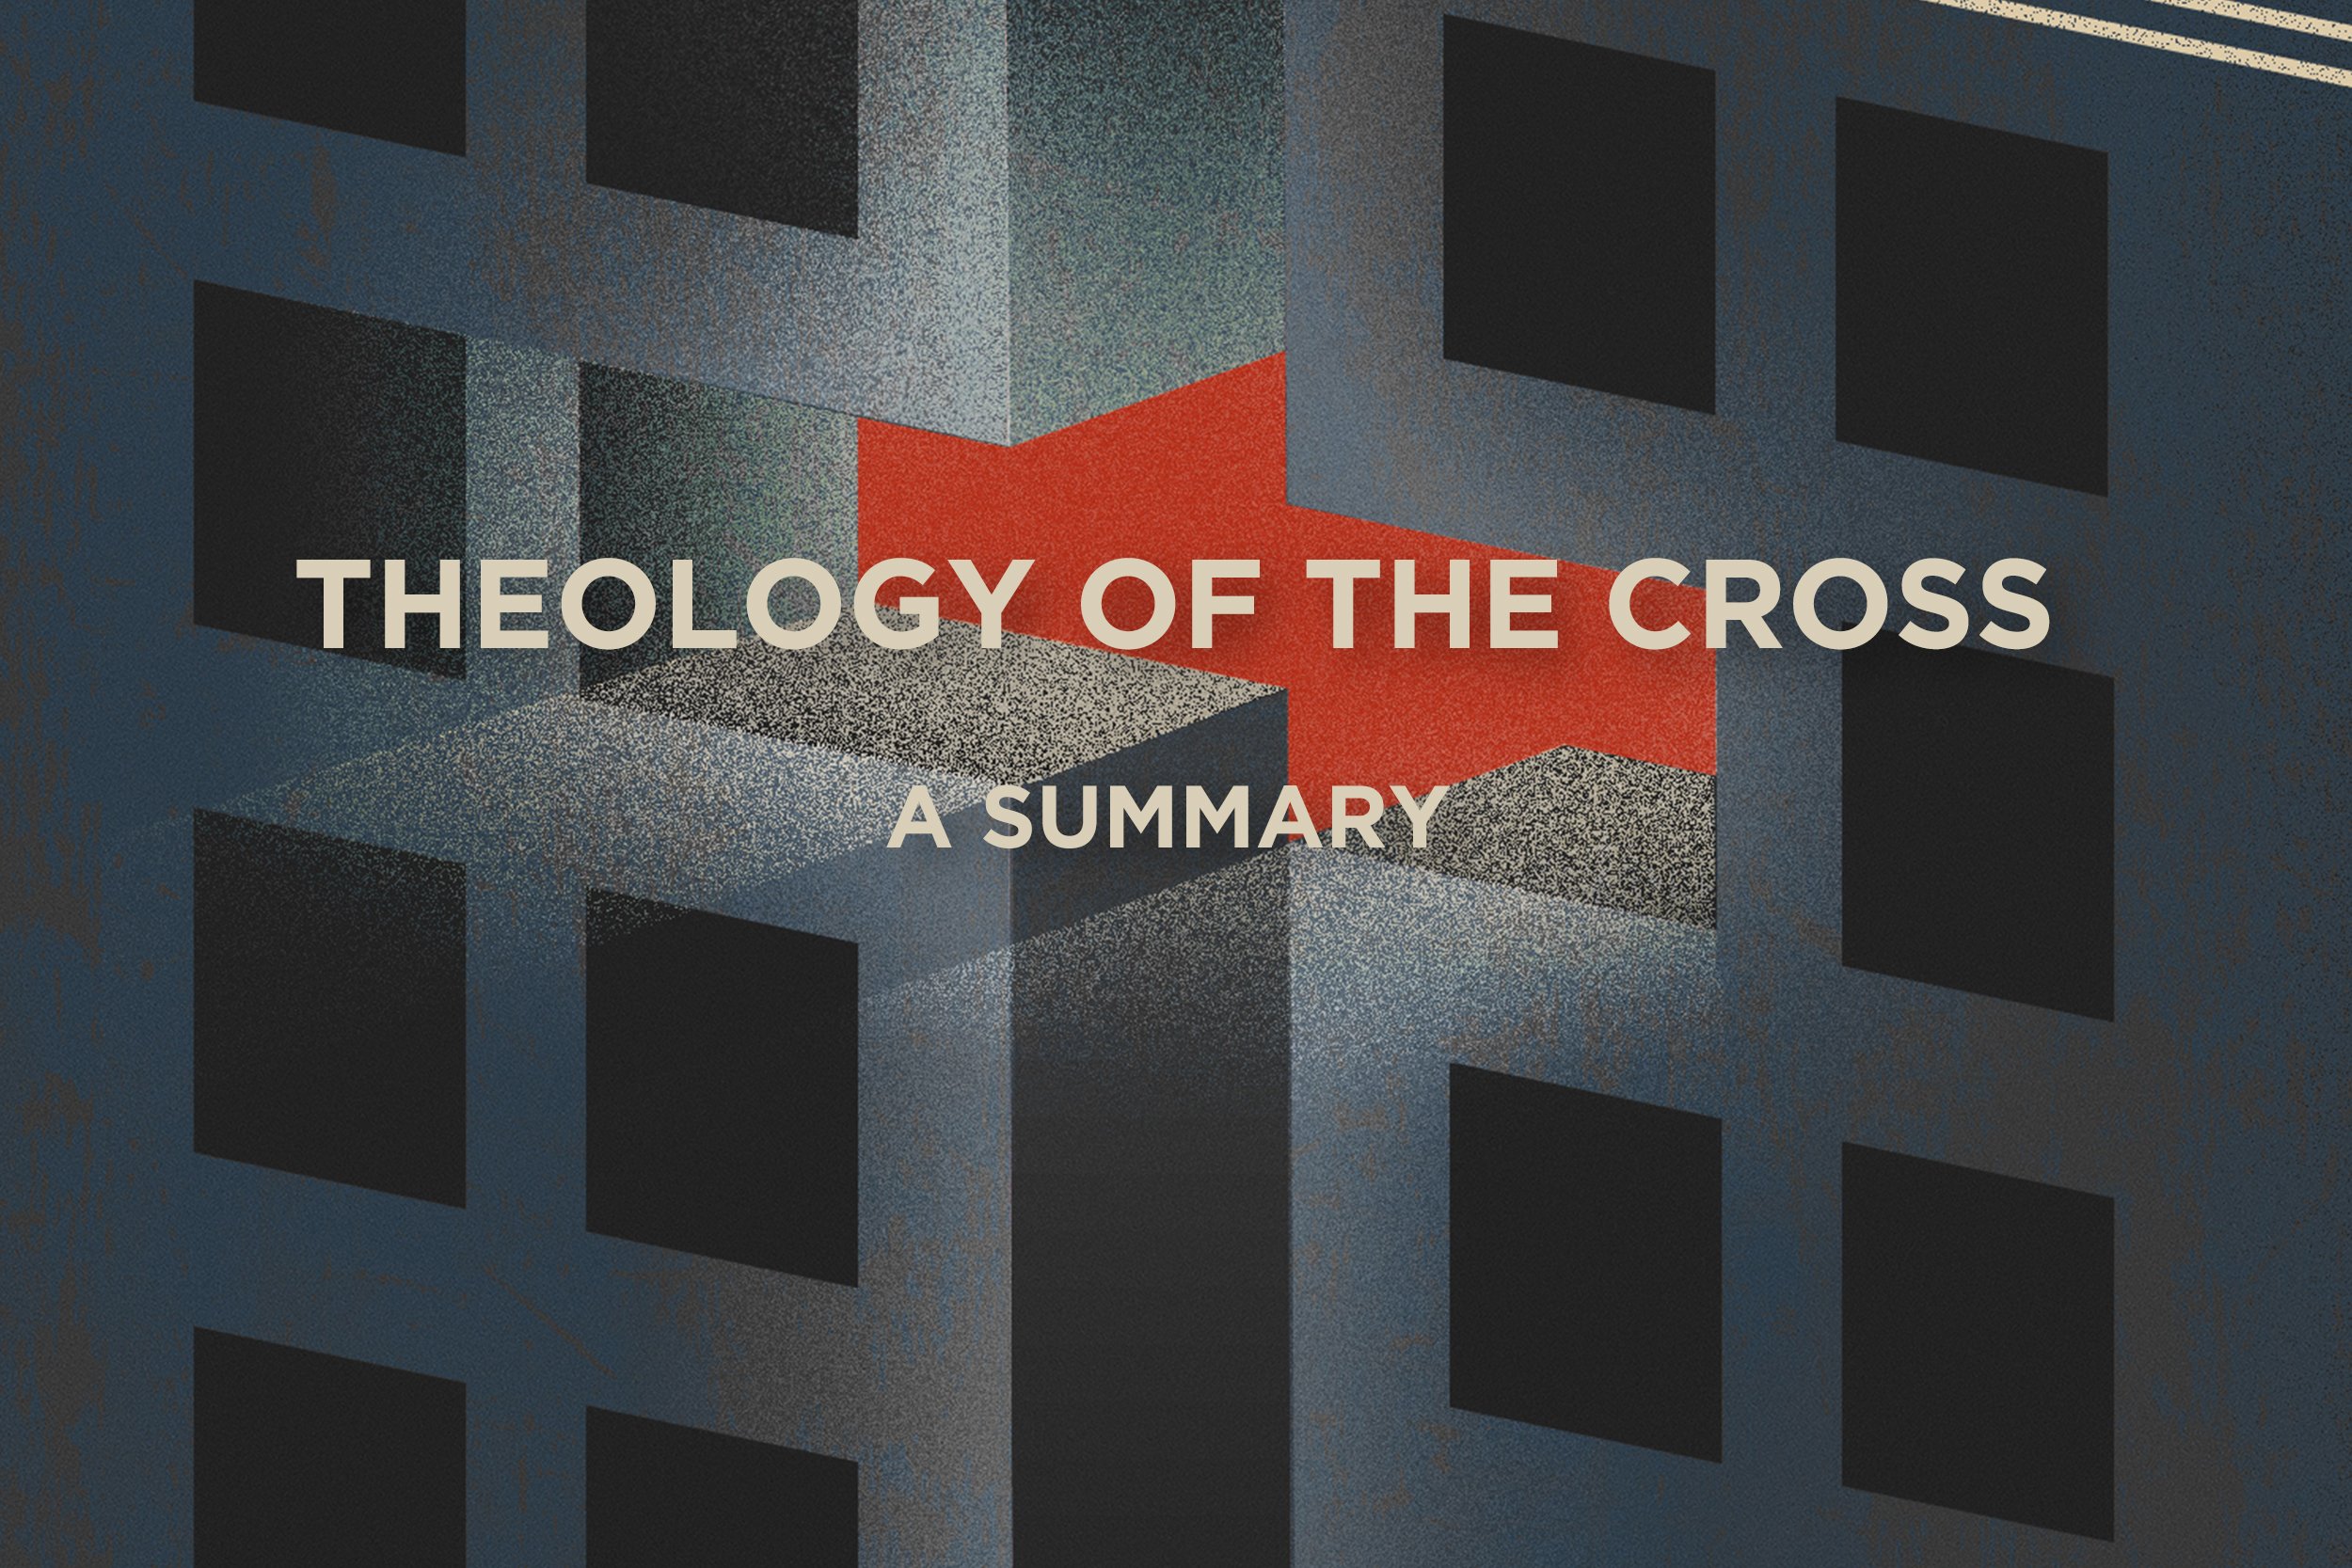 An Introduction to Luther's Theology of the Cross